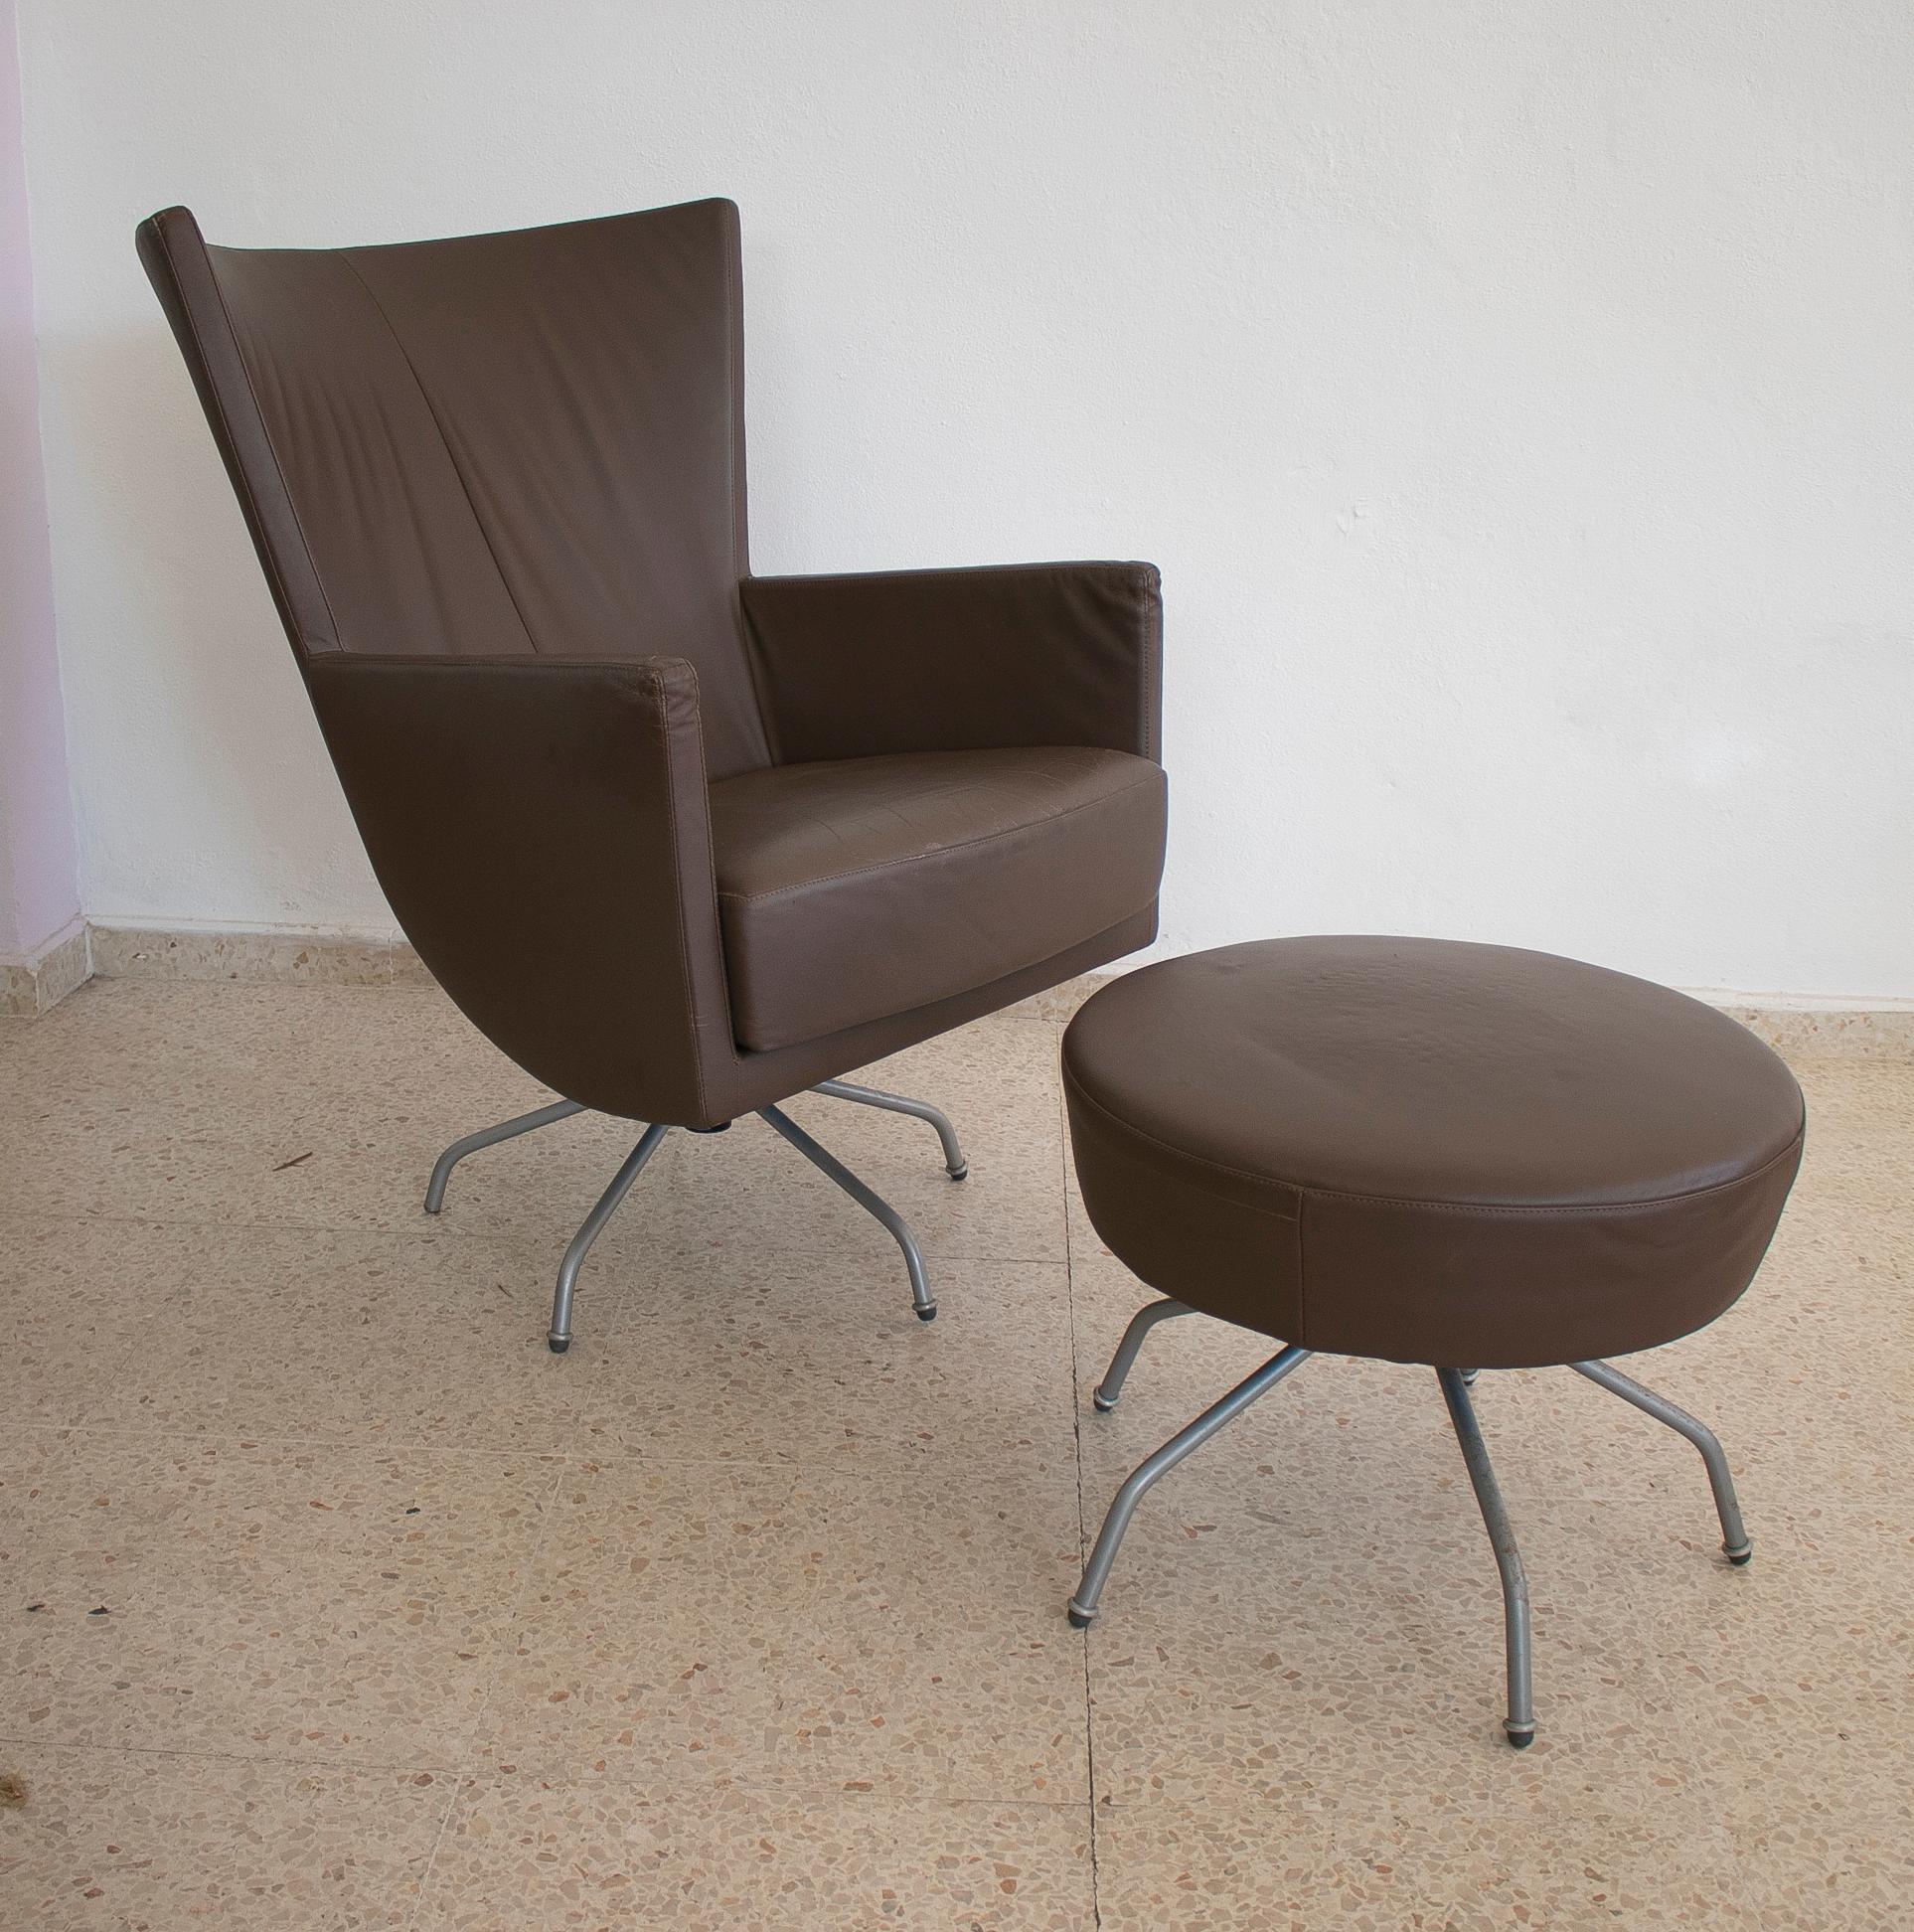 Two piece 1970s Italian leather armchair with puff.